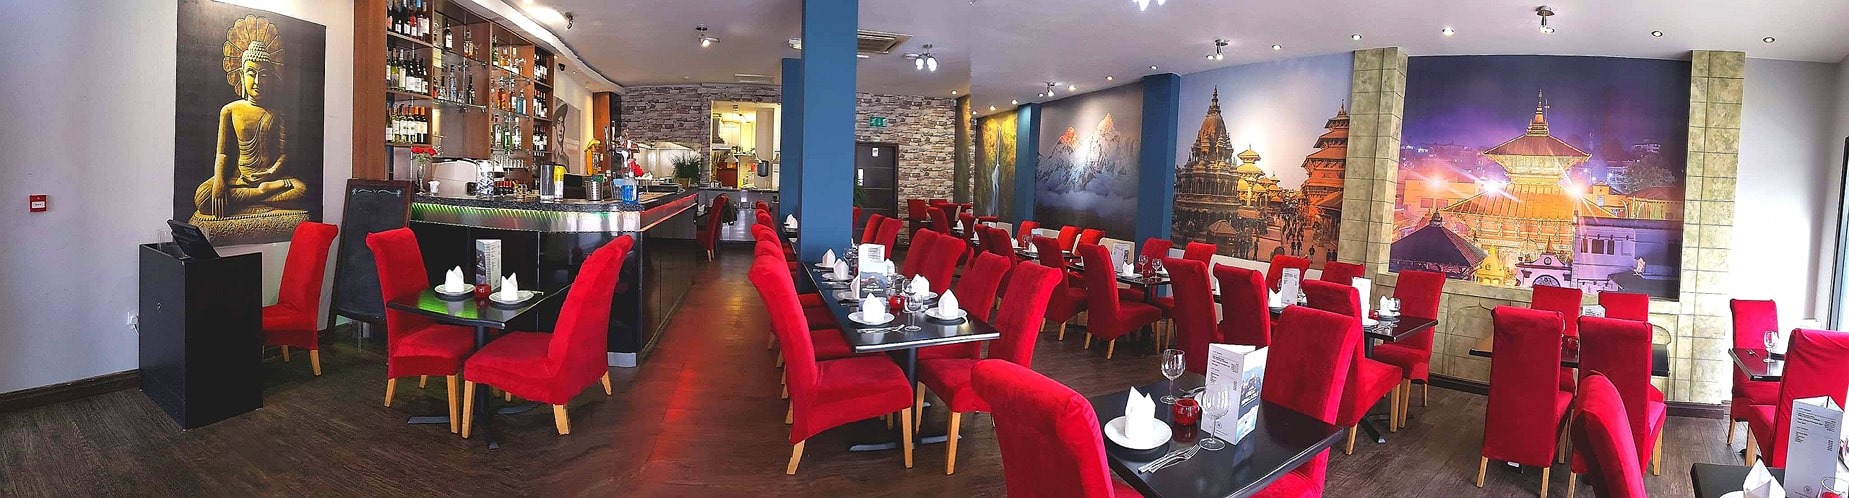 The Great Himalayas restaurant in Southport